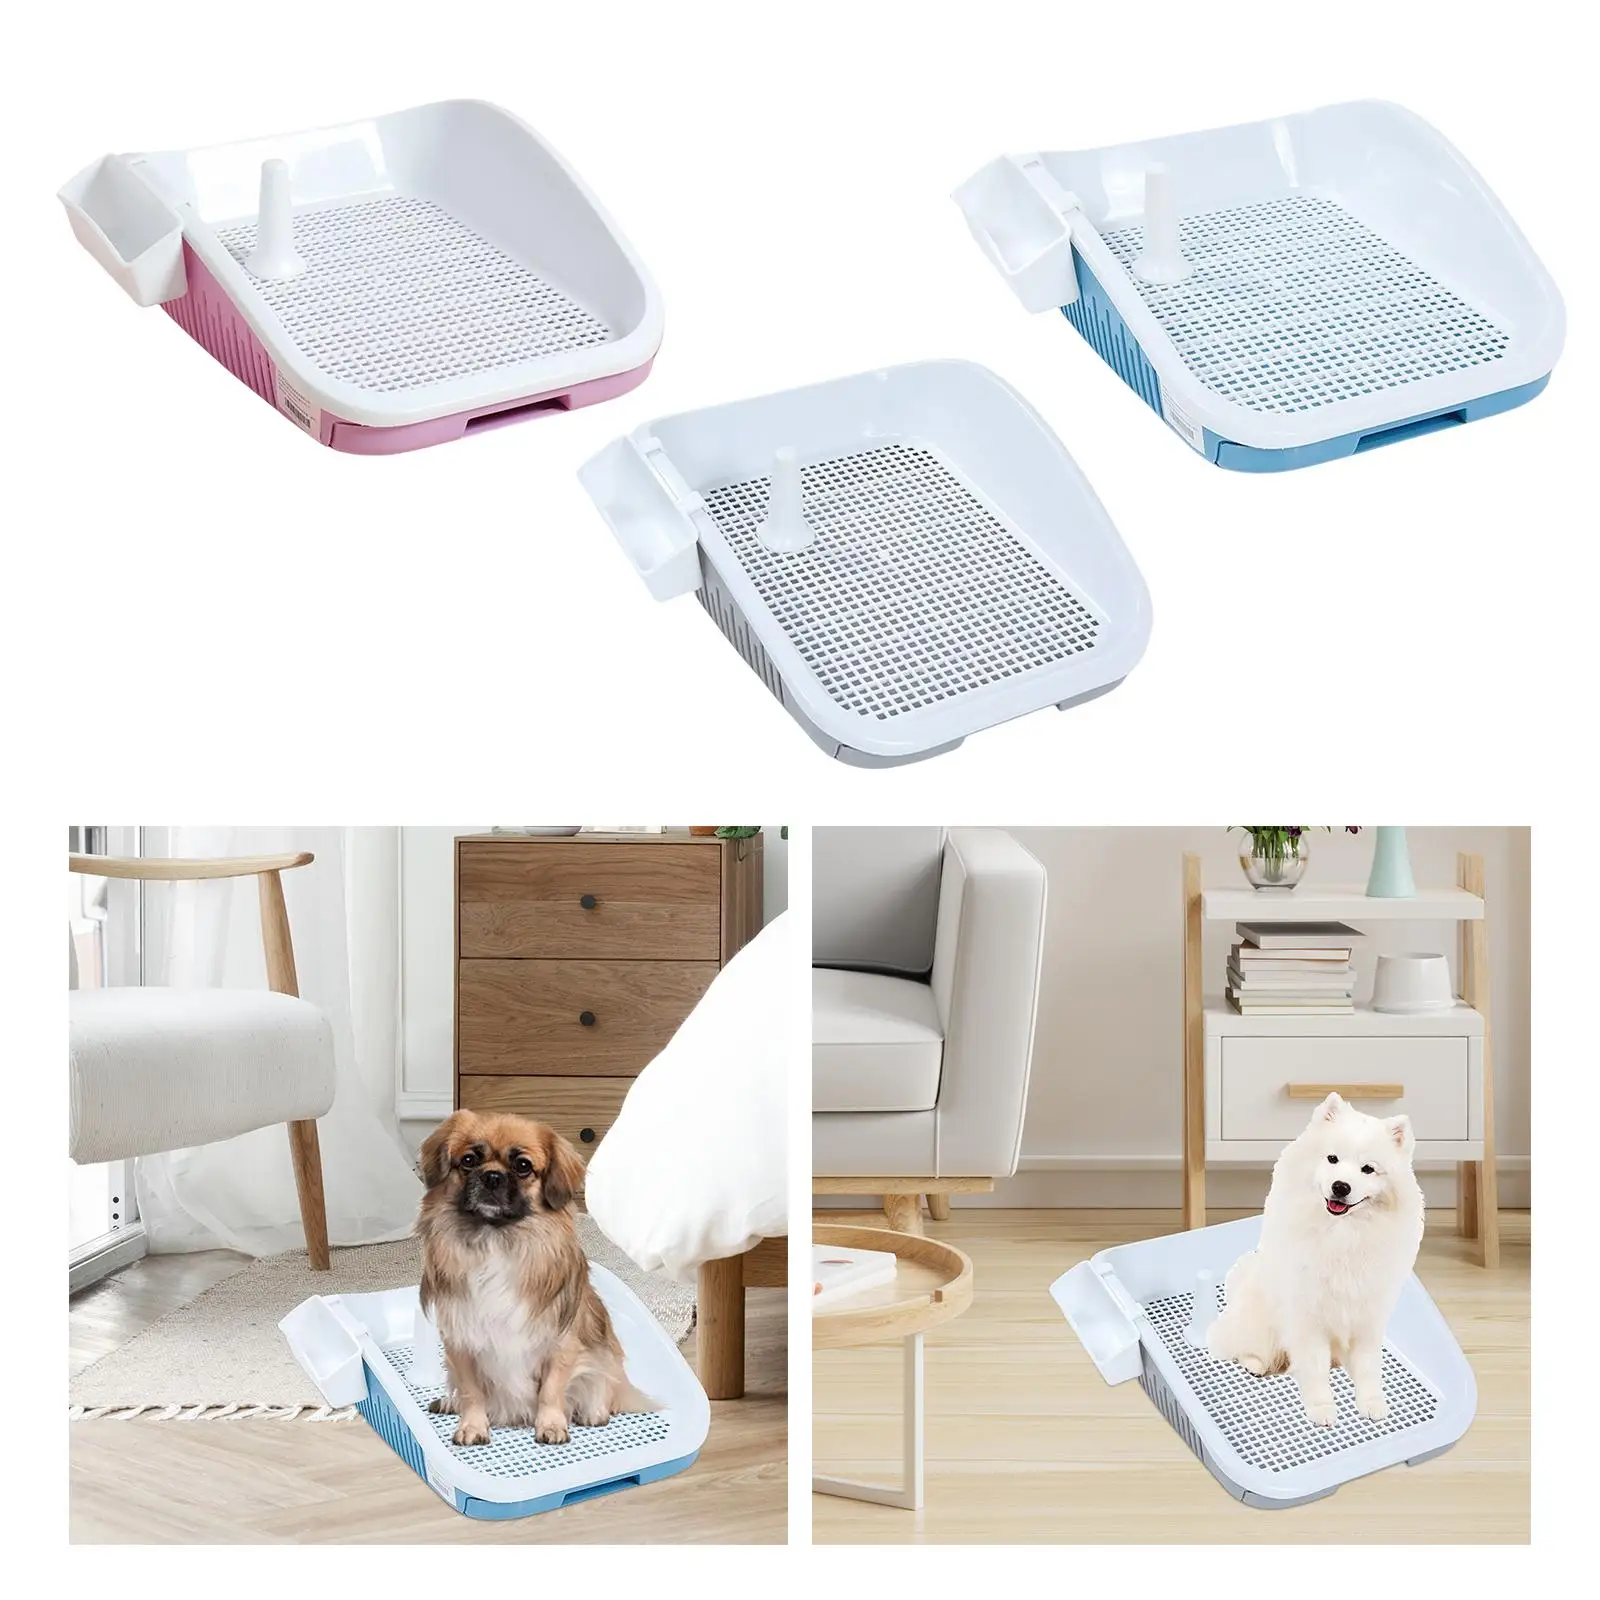 Puppy Toilet Dog Mat Holder Easy to Clean with Column Bedpan Anti Splashing Reusable Detachable Drawer Type Dog Toilet for Home